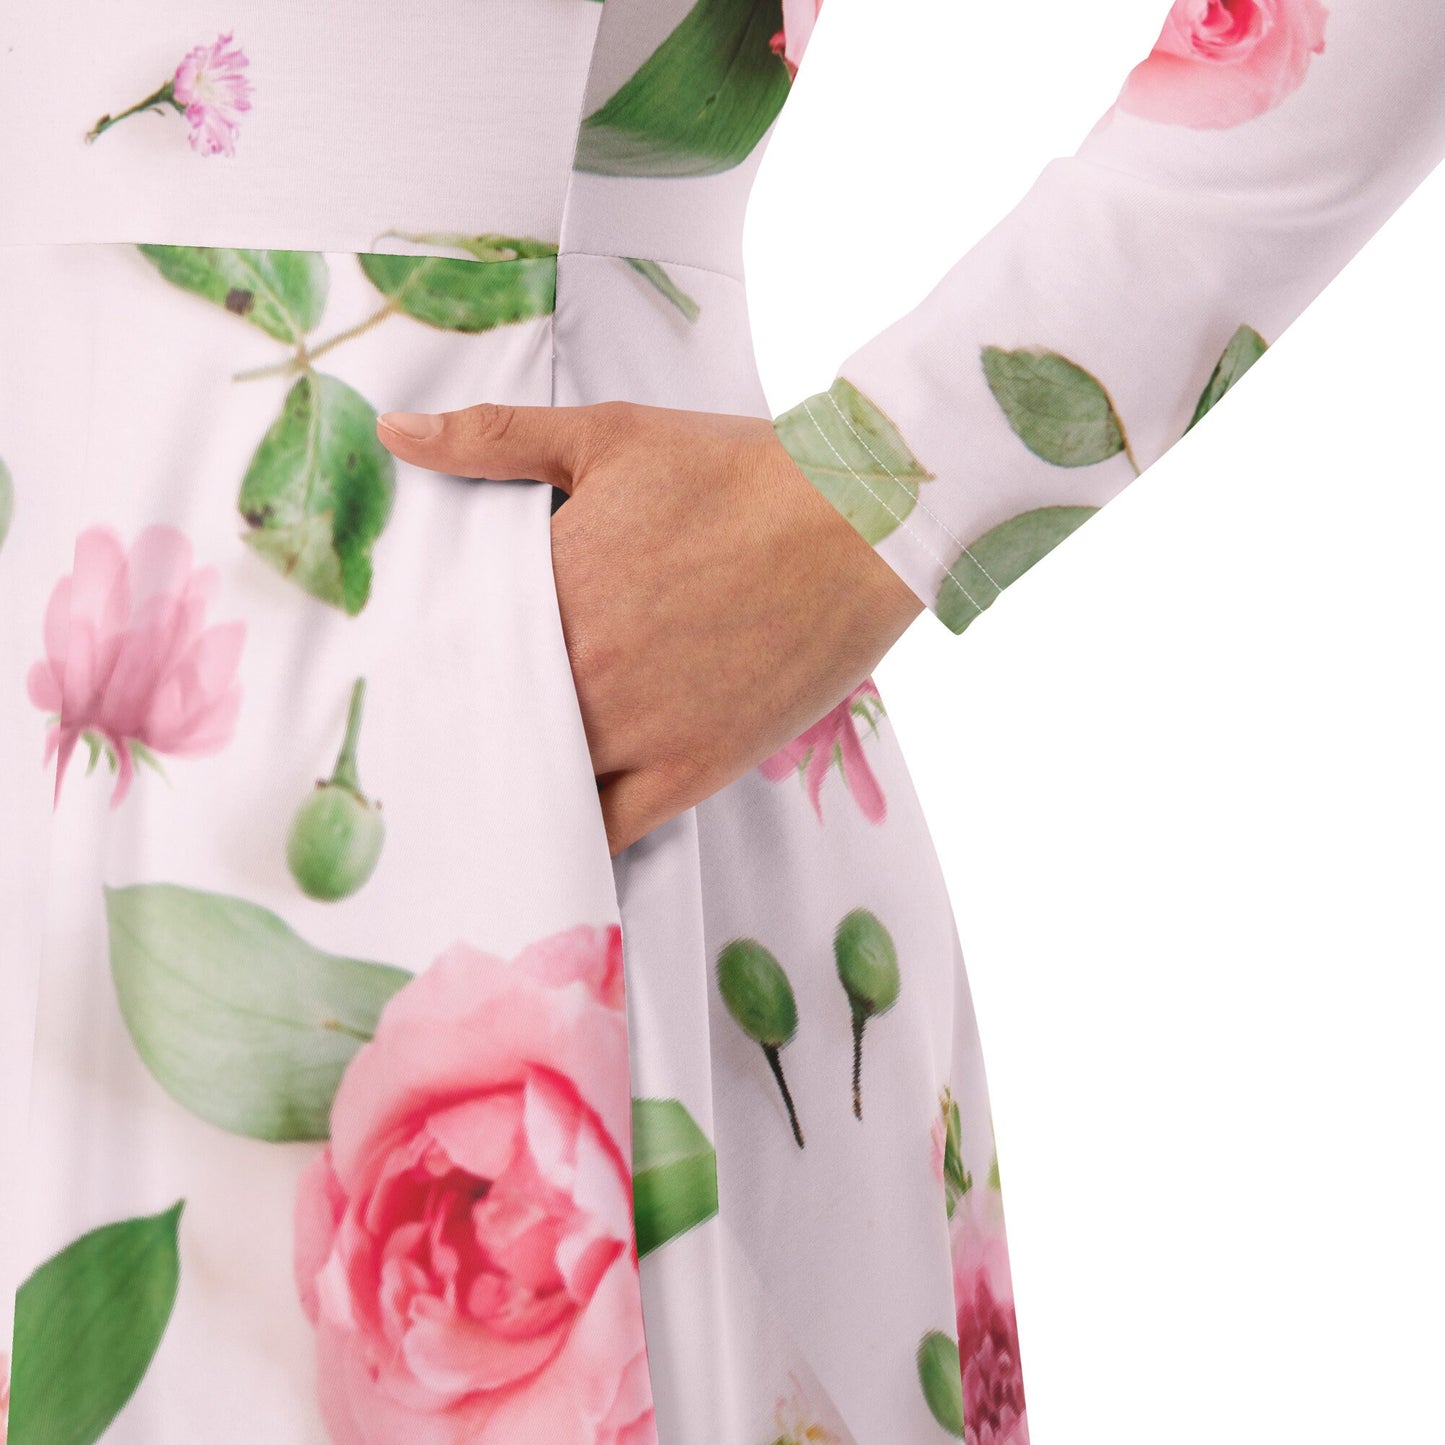 Pink Roses floral Plus Size Long Sleeves All-over print midi dress, Oversized Floral Dress, Modest nature Lovers Pink Dress